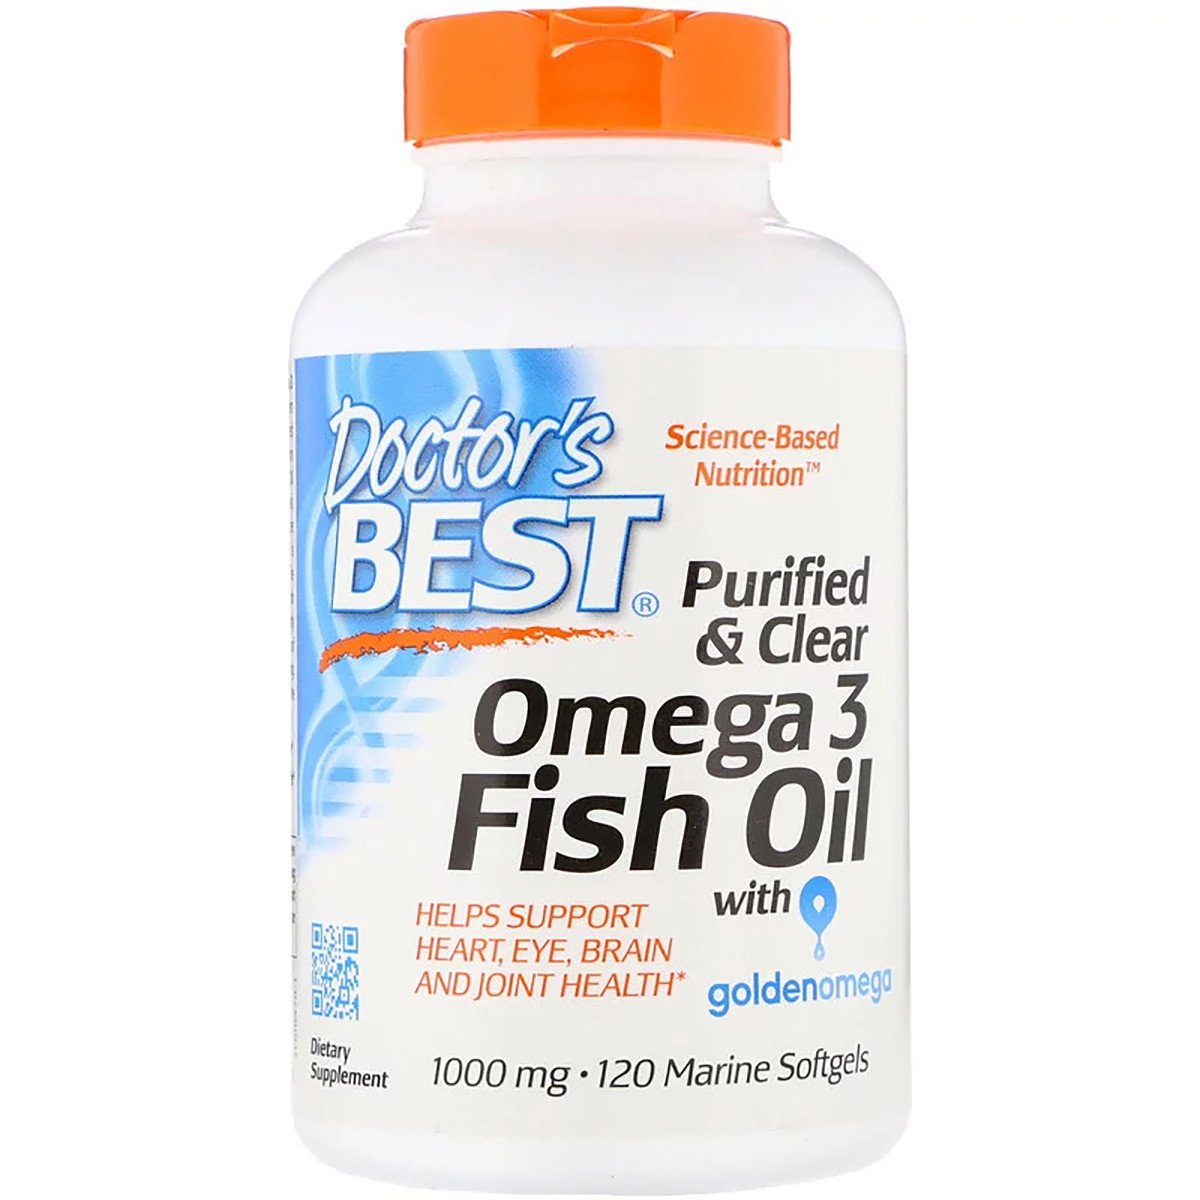 Doctor's BEST Рыбий жир Омега-3, Doctor's Best, Omega 3 Fish Oil with Goldenomega, 1000 мг, 120 капсул, , 